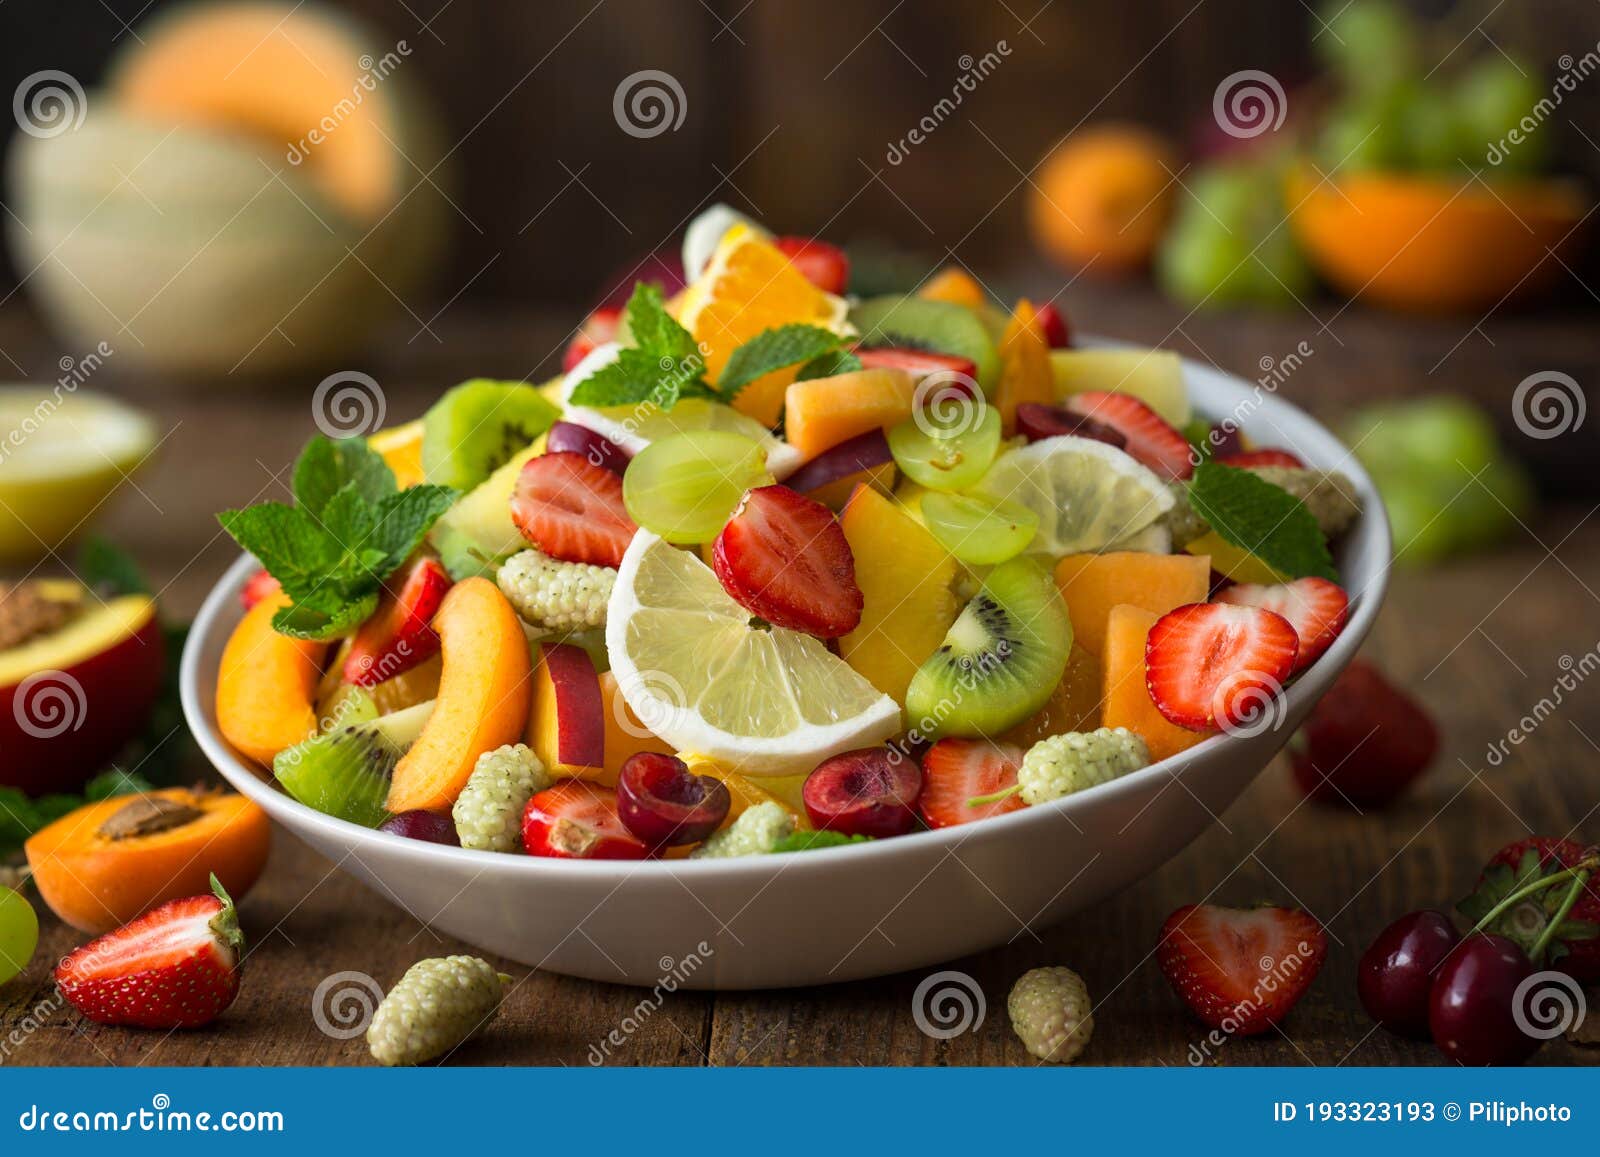 Healthy Fresh Fruit Salad in the Bowl Stock Image - Image of berry ...